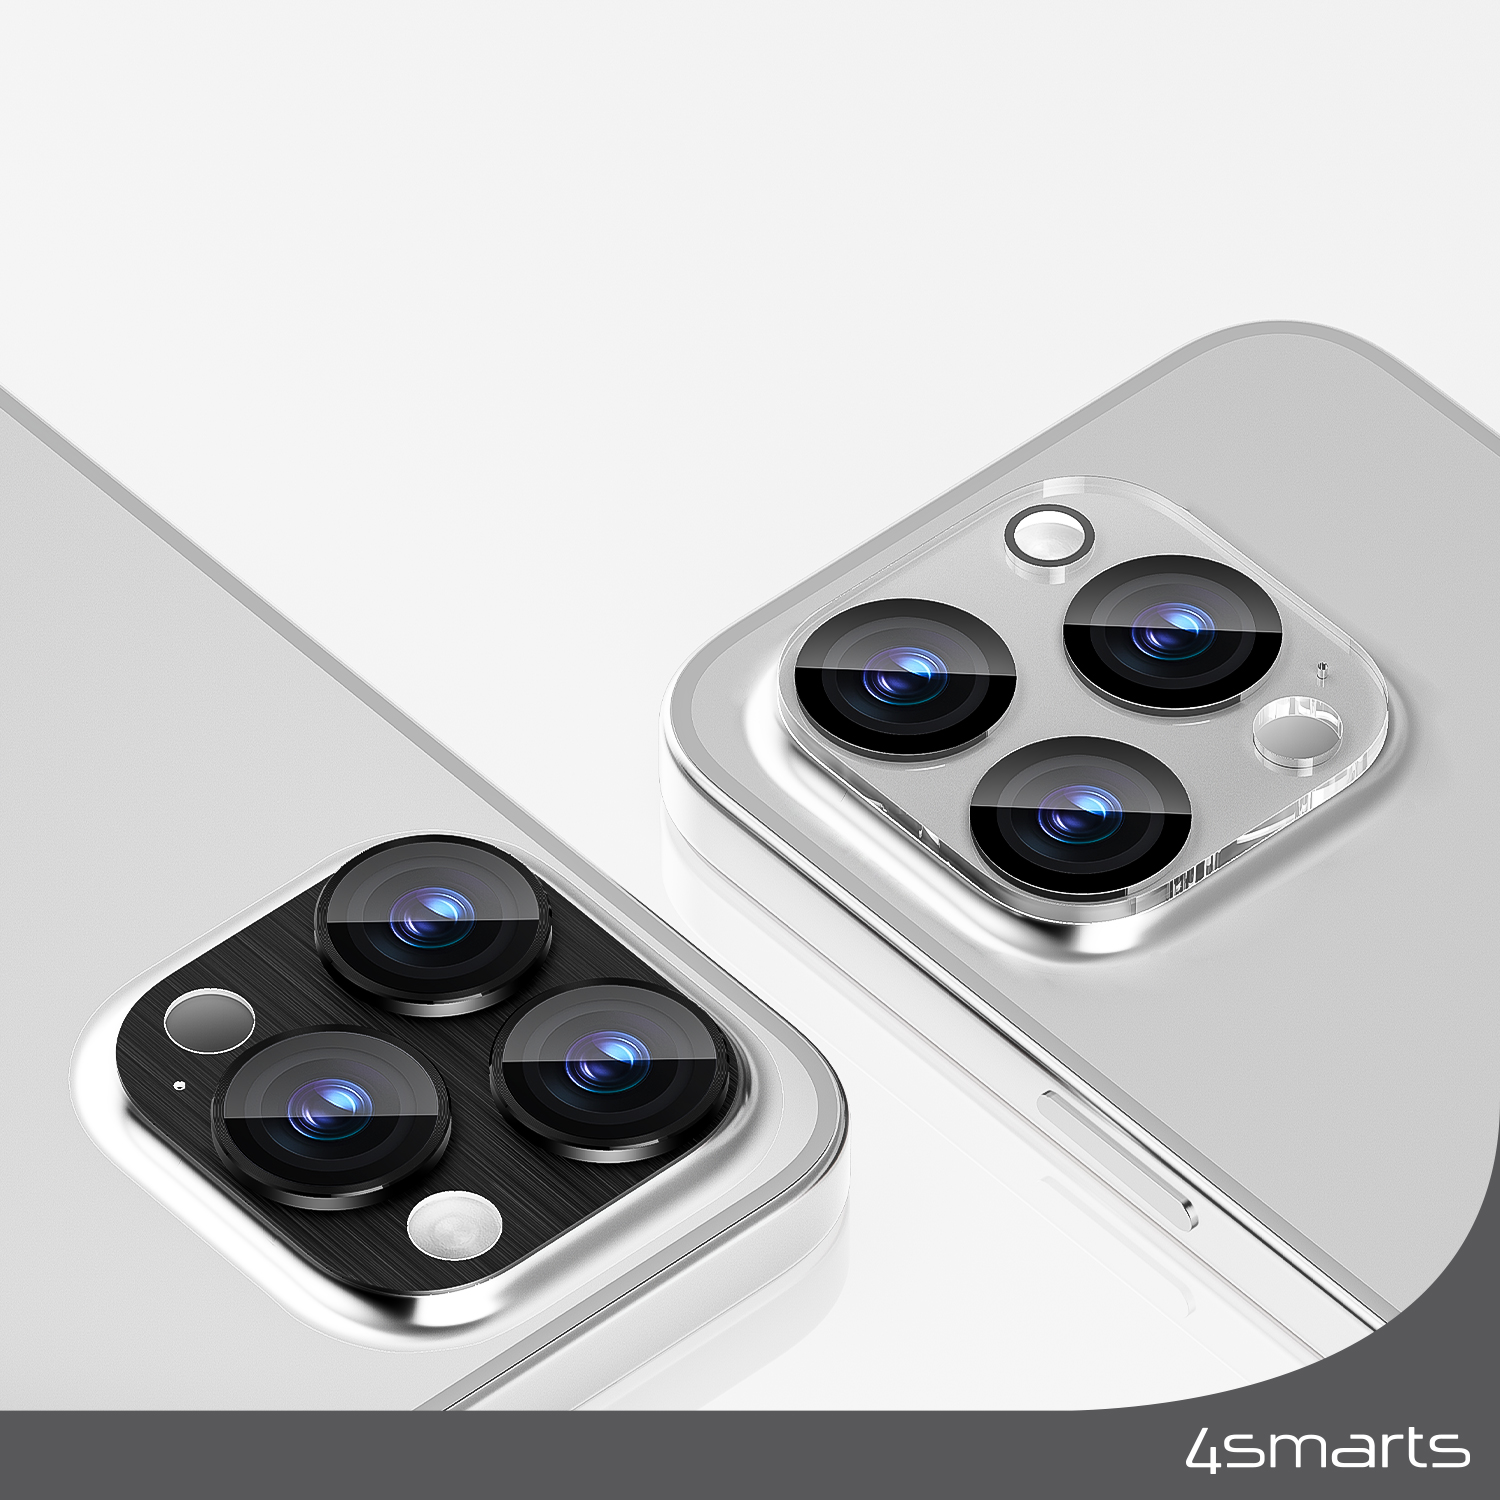 The 4smarts Lens Protector StyleGlass for Apple iPhone 15 Pro / 15 Pro Max Set of 2 is available in 2 color options and is designed to fit the 3 camera lenses on the back of your iPhone.